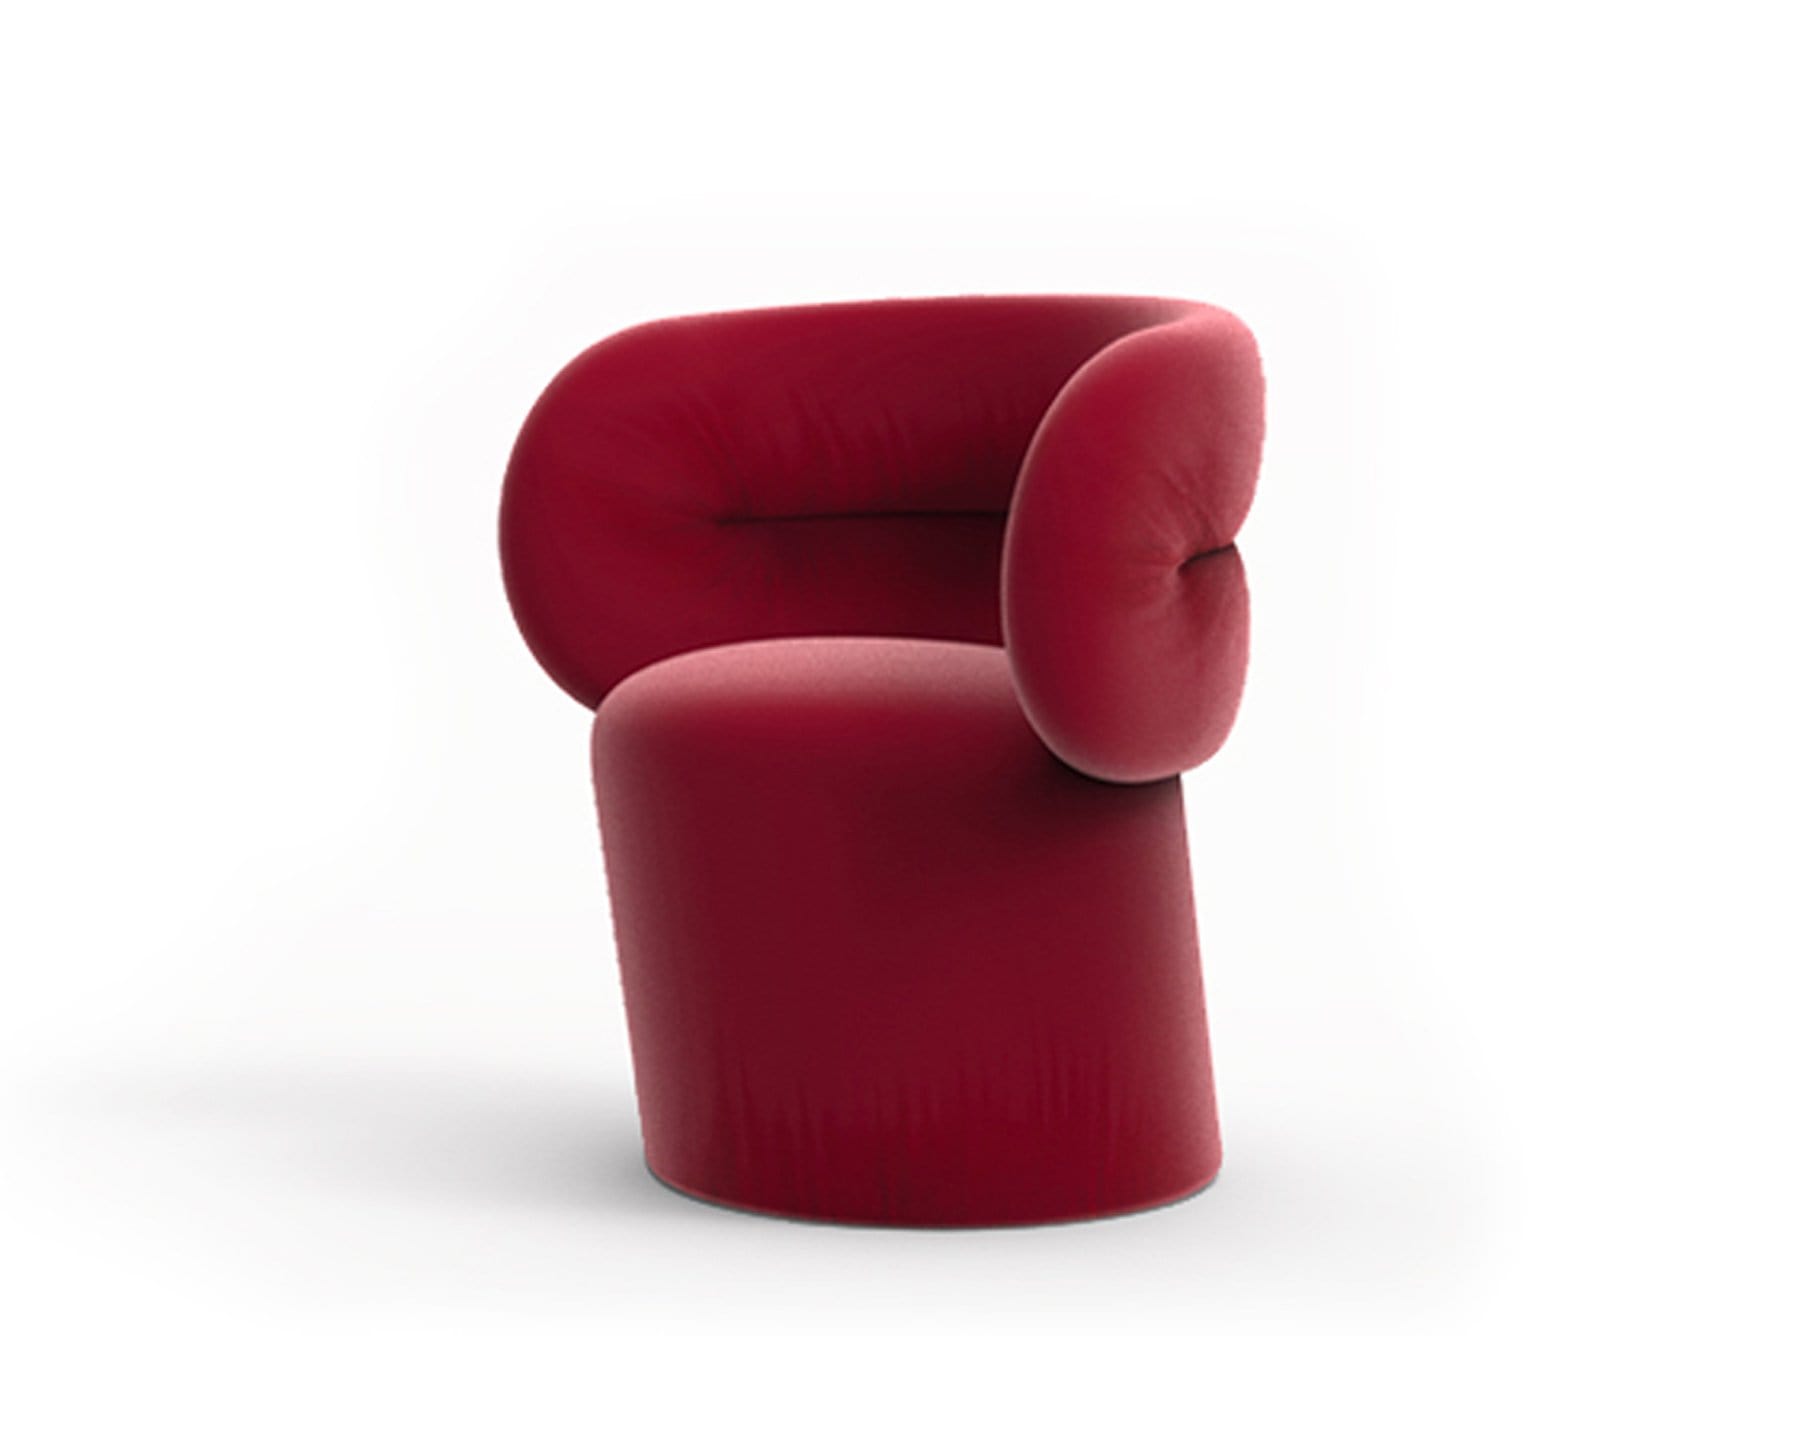 Two Bloomy chairs by Patricia Urquiola for Moroso Italy